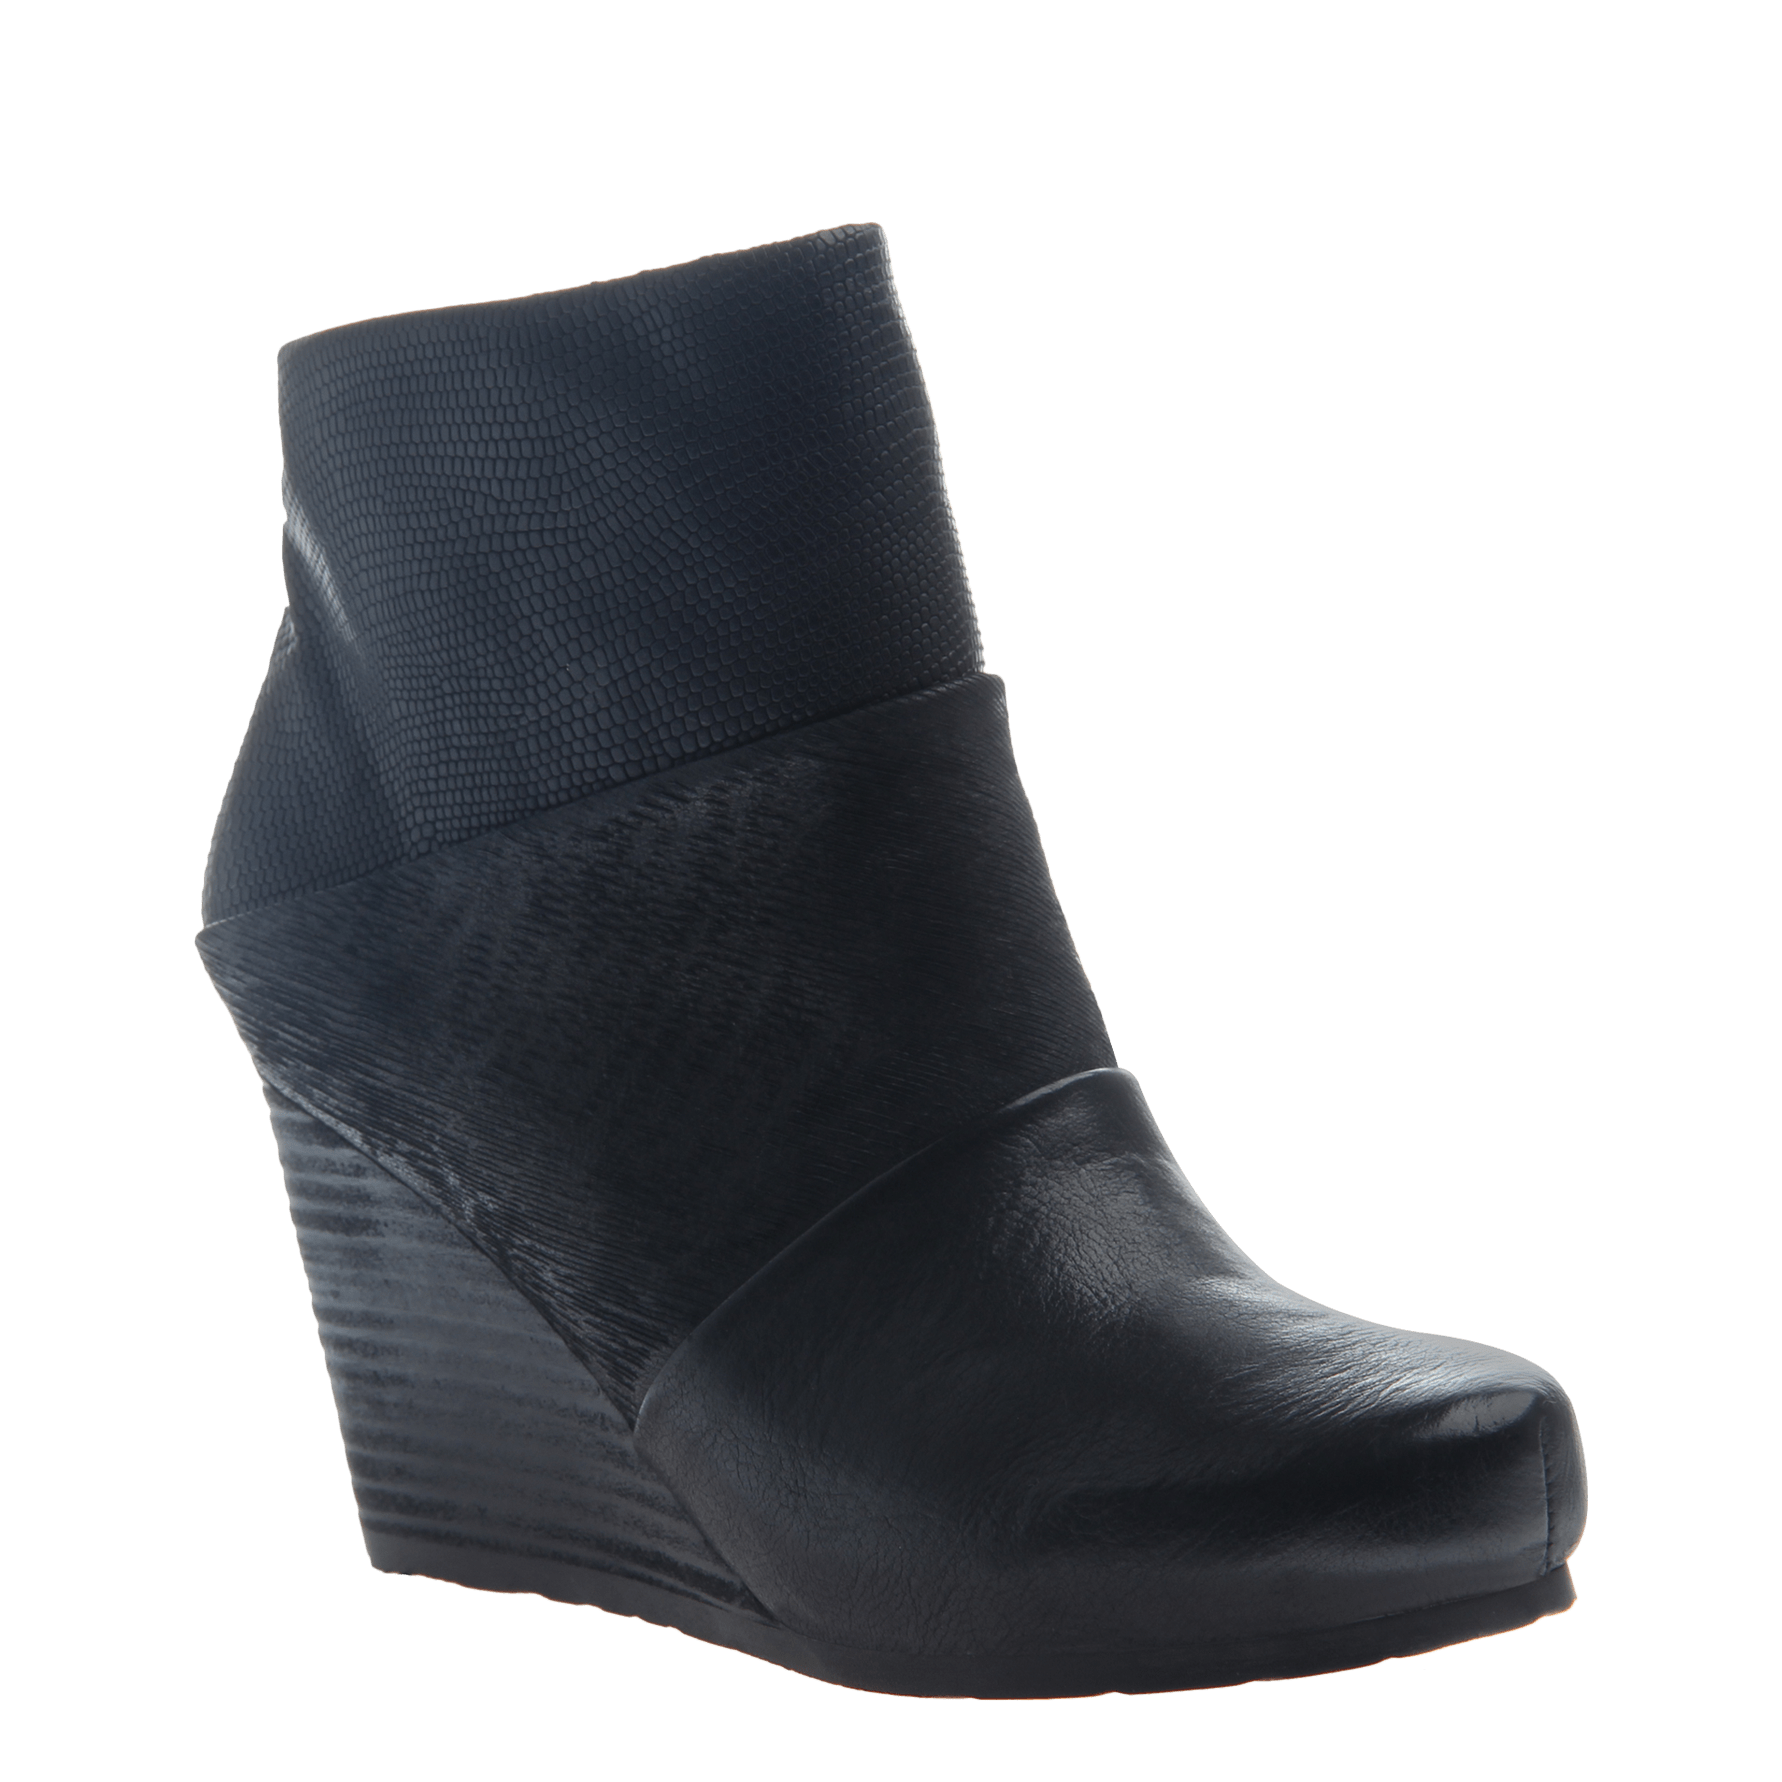 long black wedge boots